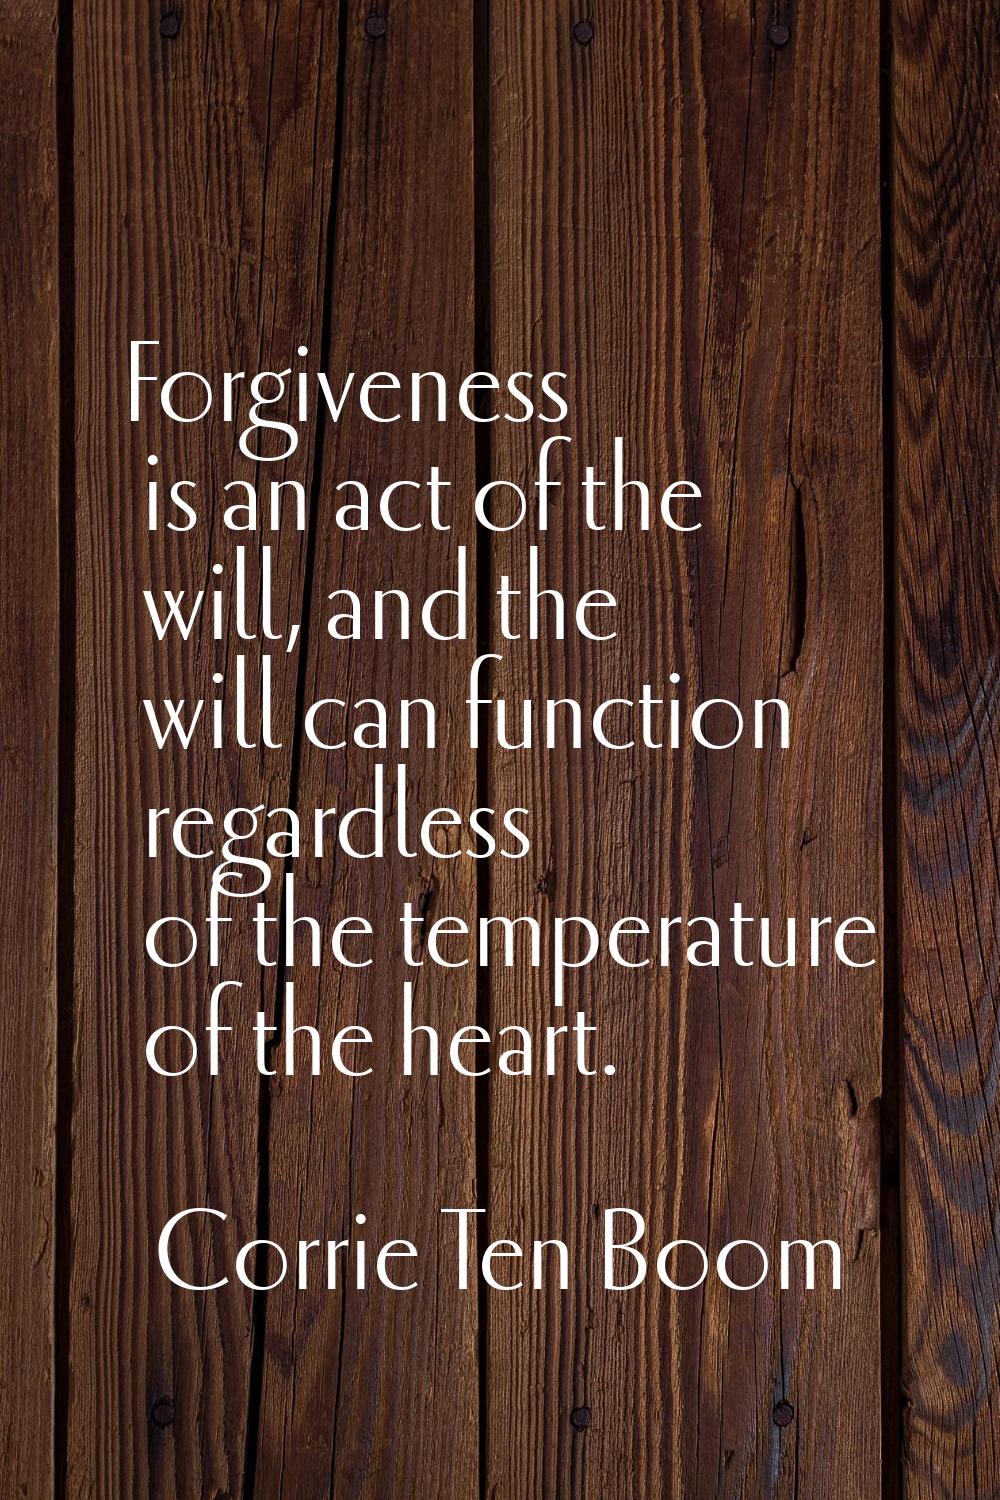 Forgiveness is an act of the will, and the will can function regardless of the temperature of the h